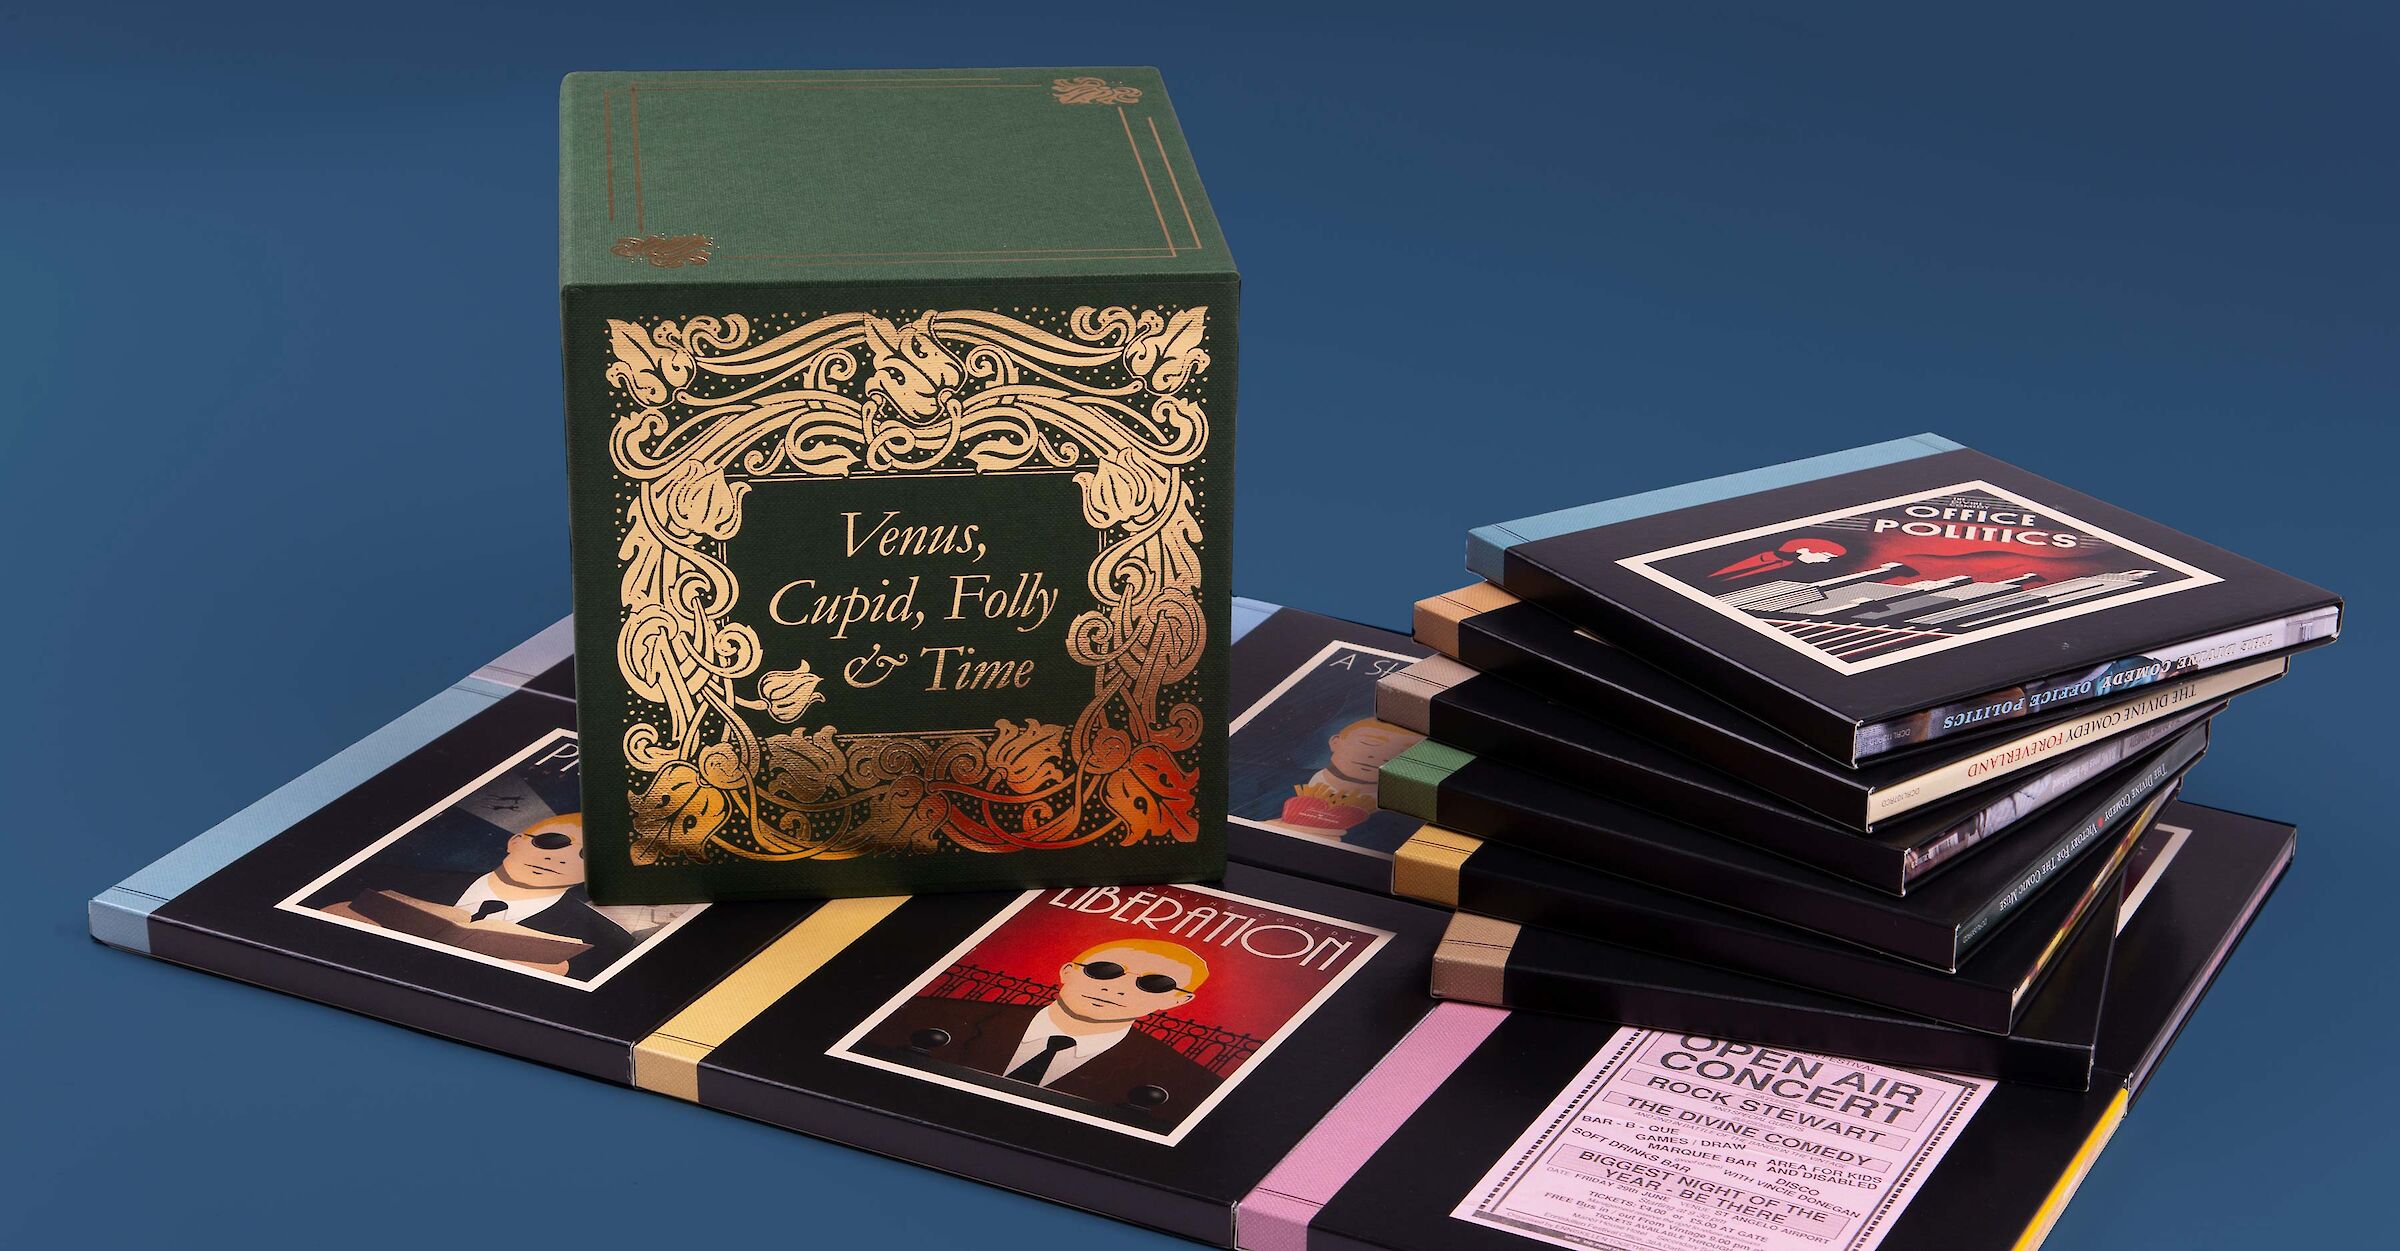 The Divine Comedy Venus, Cupid, Folly and Time limited-edition boxset with 112 page perfect bound lyric book